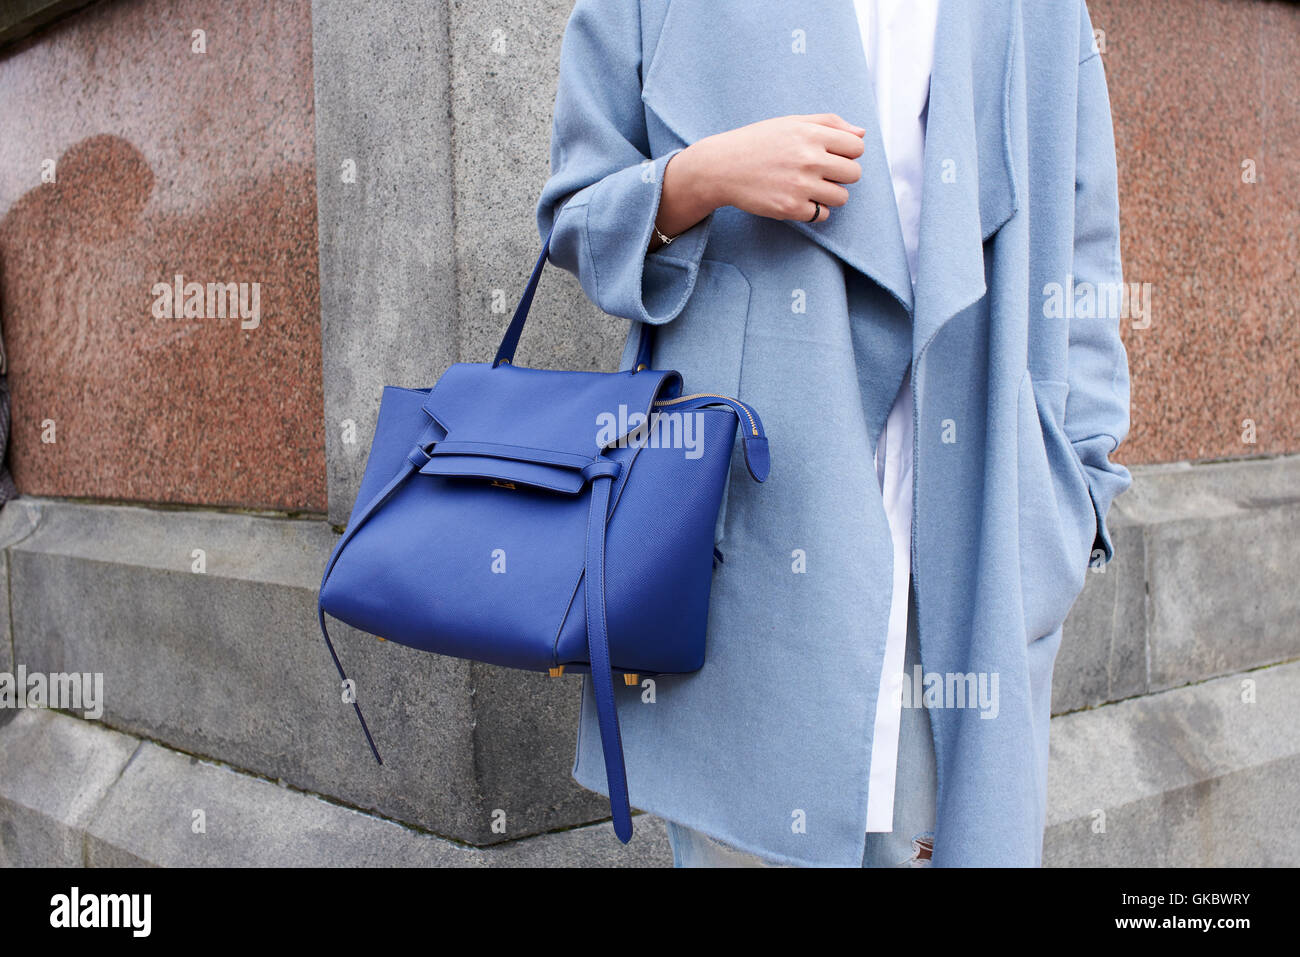 Woman in blue coat holding blue bag, mid section crop Stock Photo